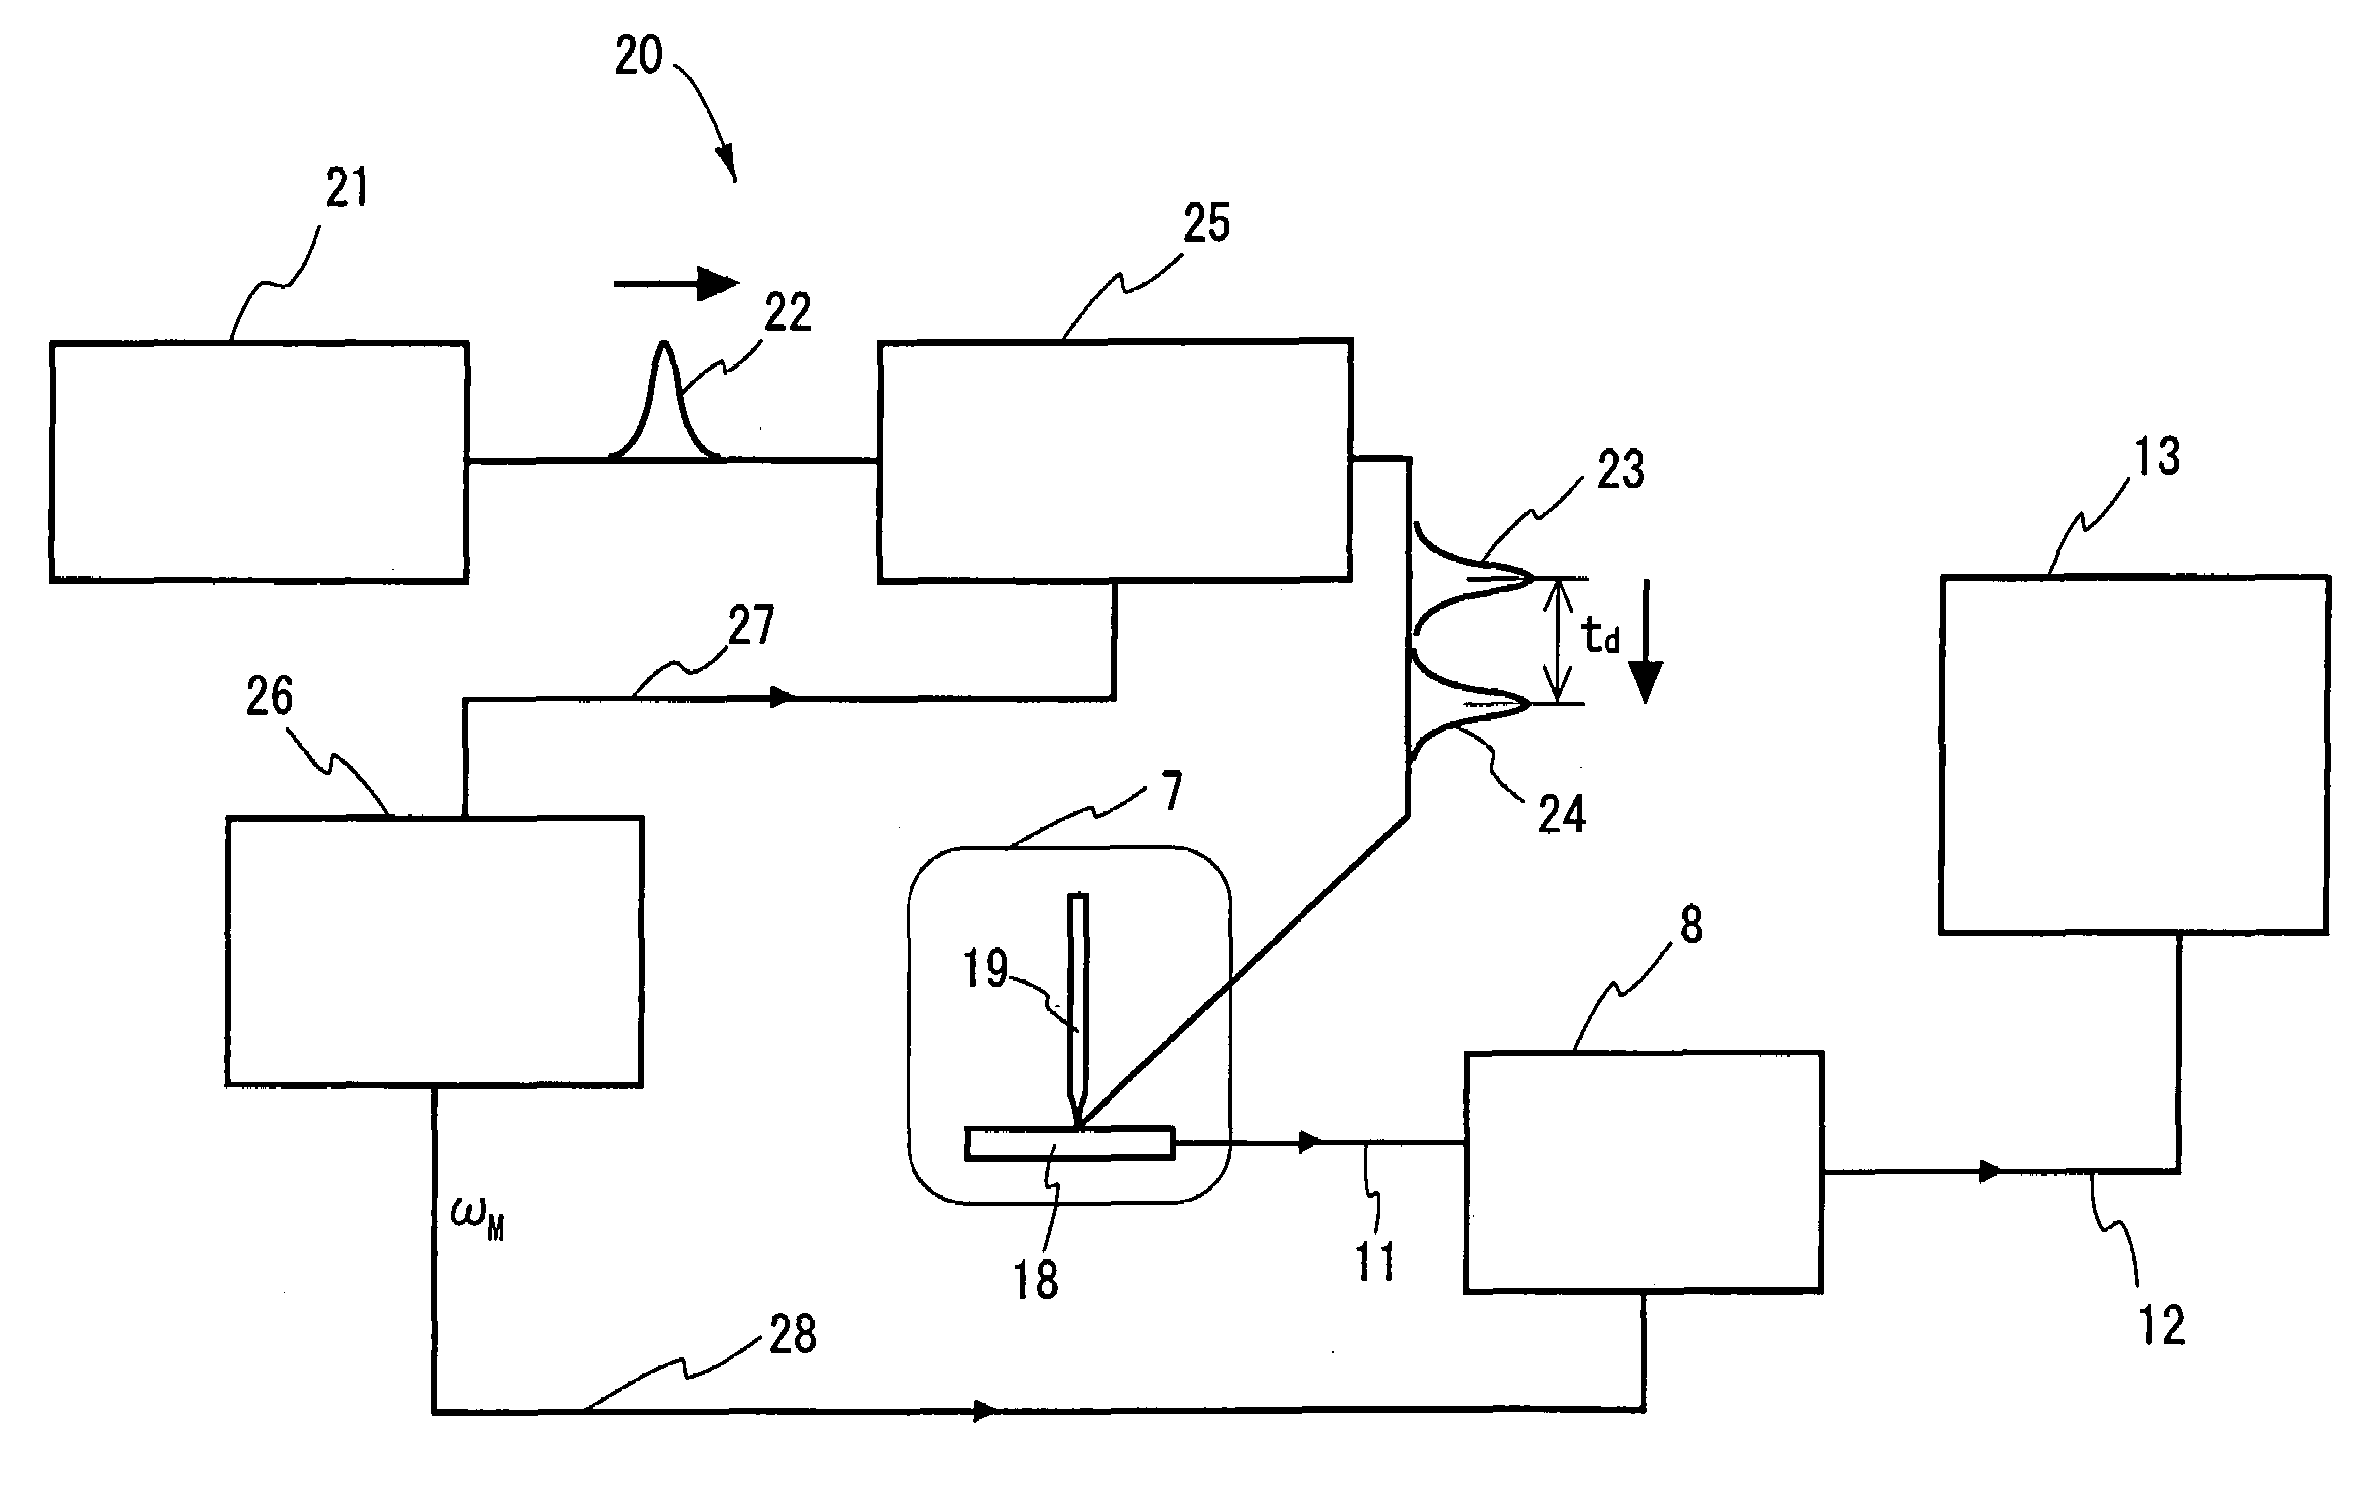 Delay time modulation femtosecond time-resolved scanning probe microscope apparatus